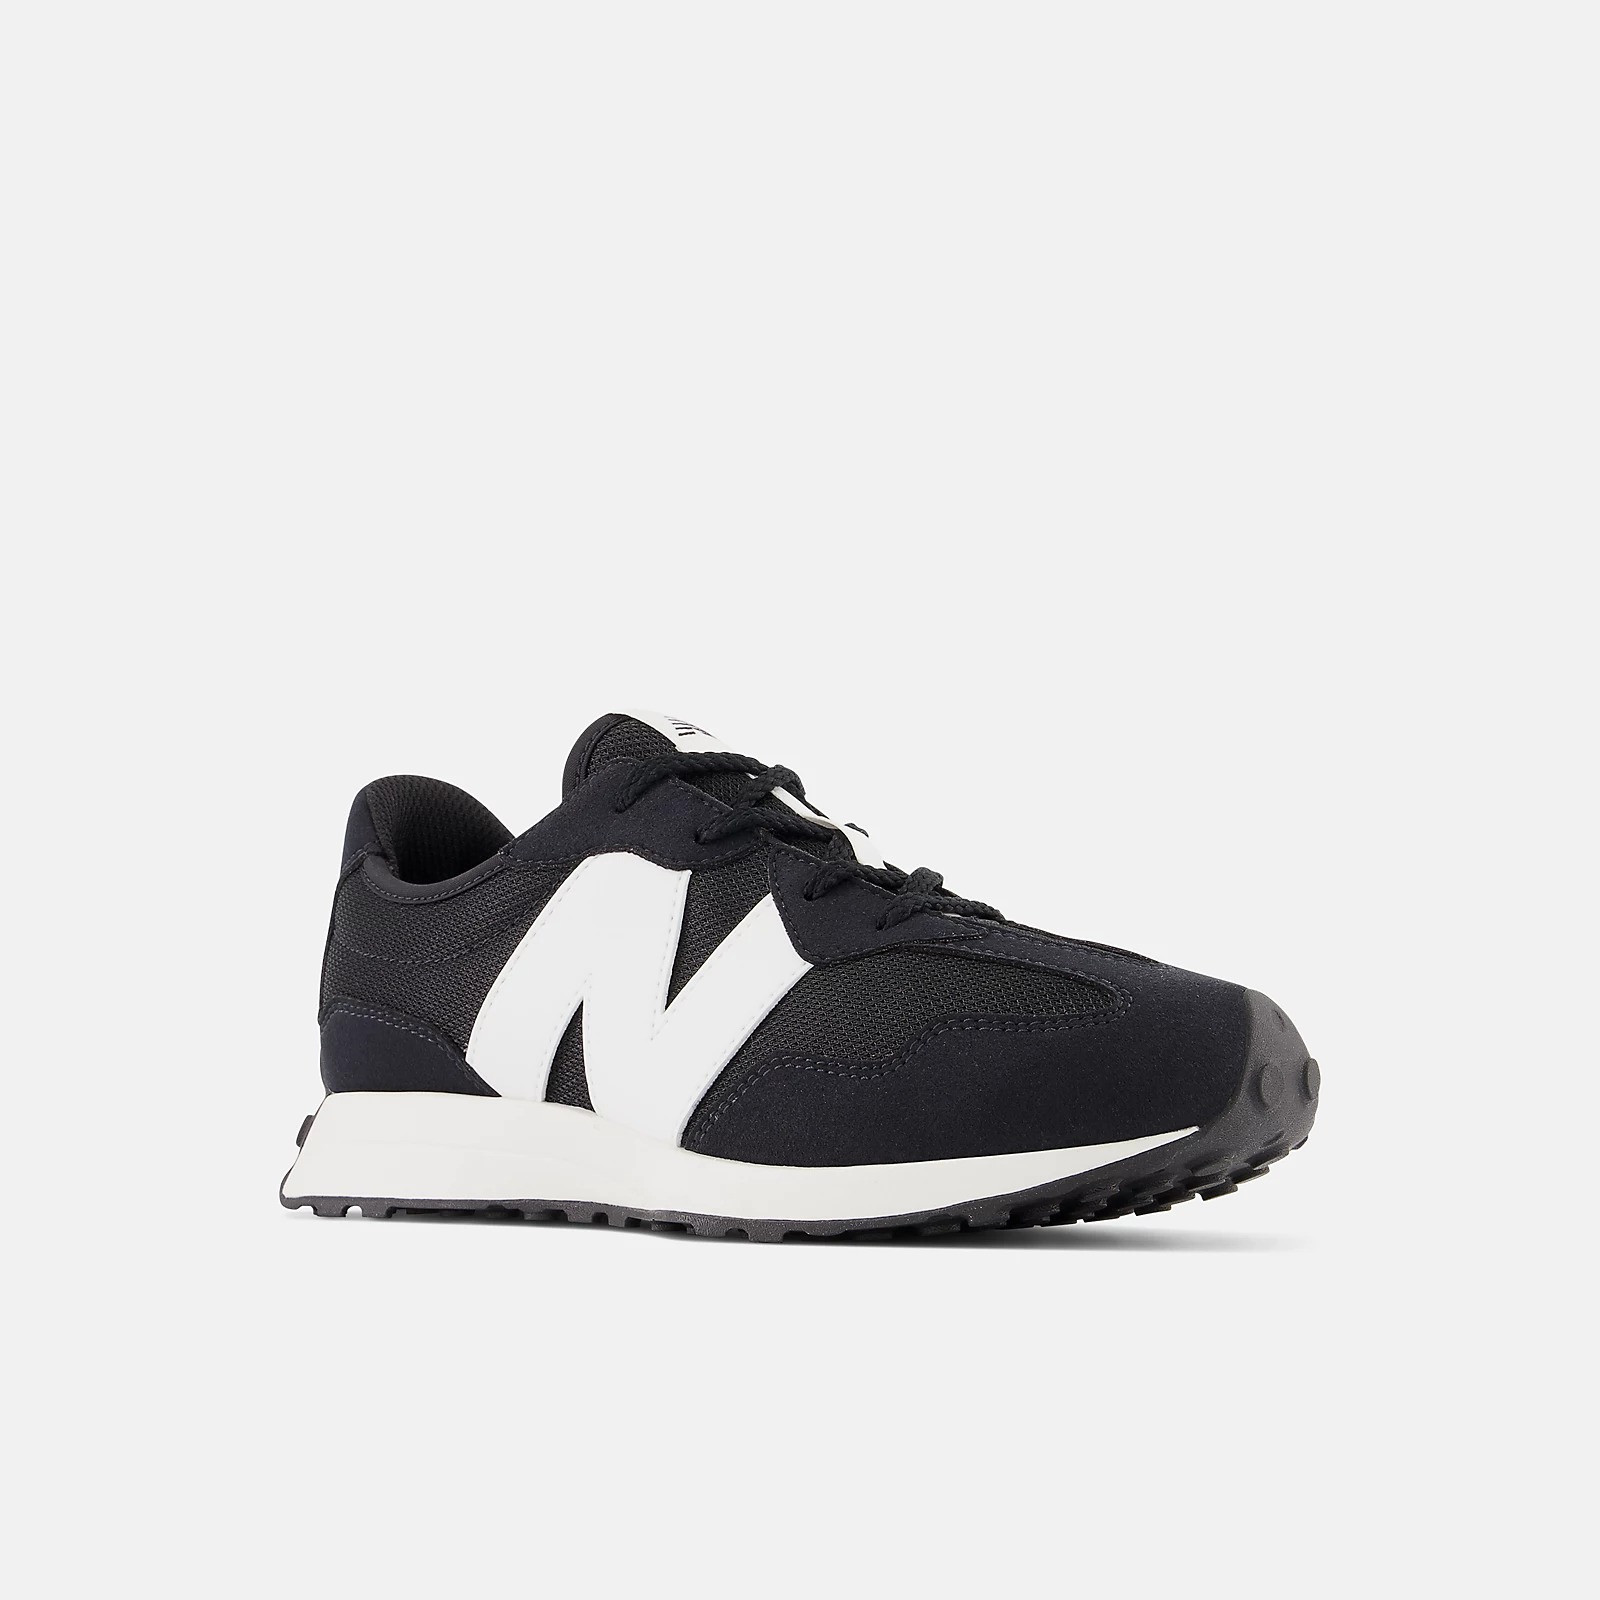 New Balance 327 GS shoes for children (Unisex from 36 to 40) - Black/White - GS327CBW